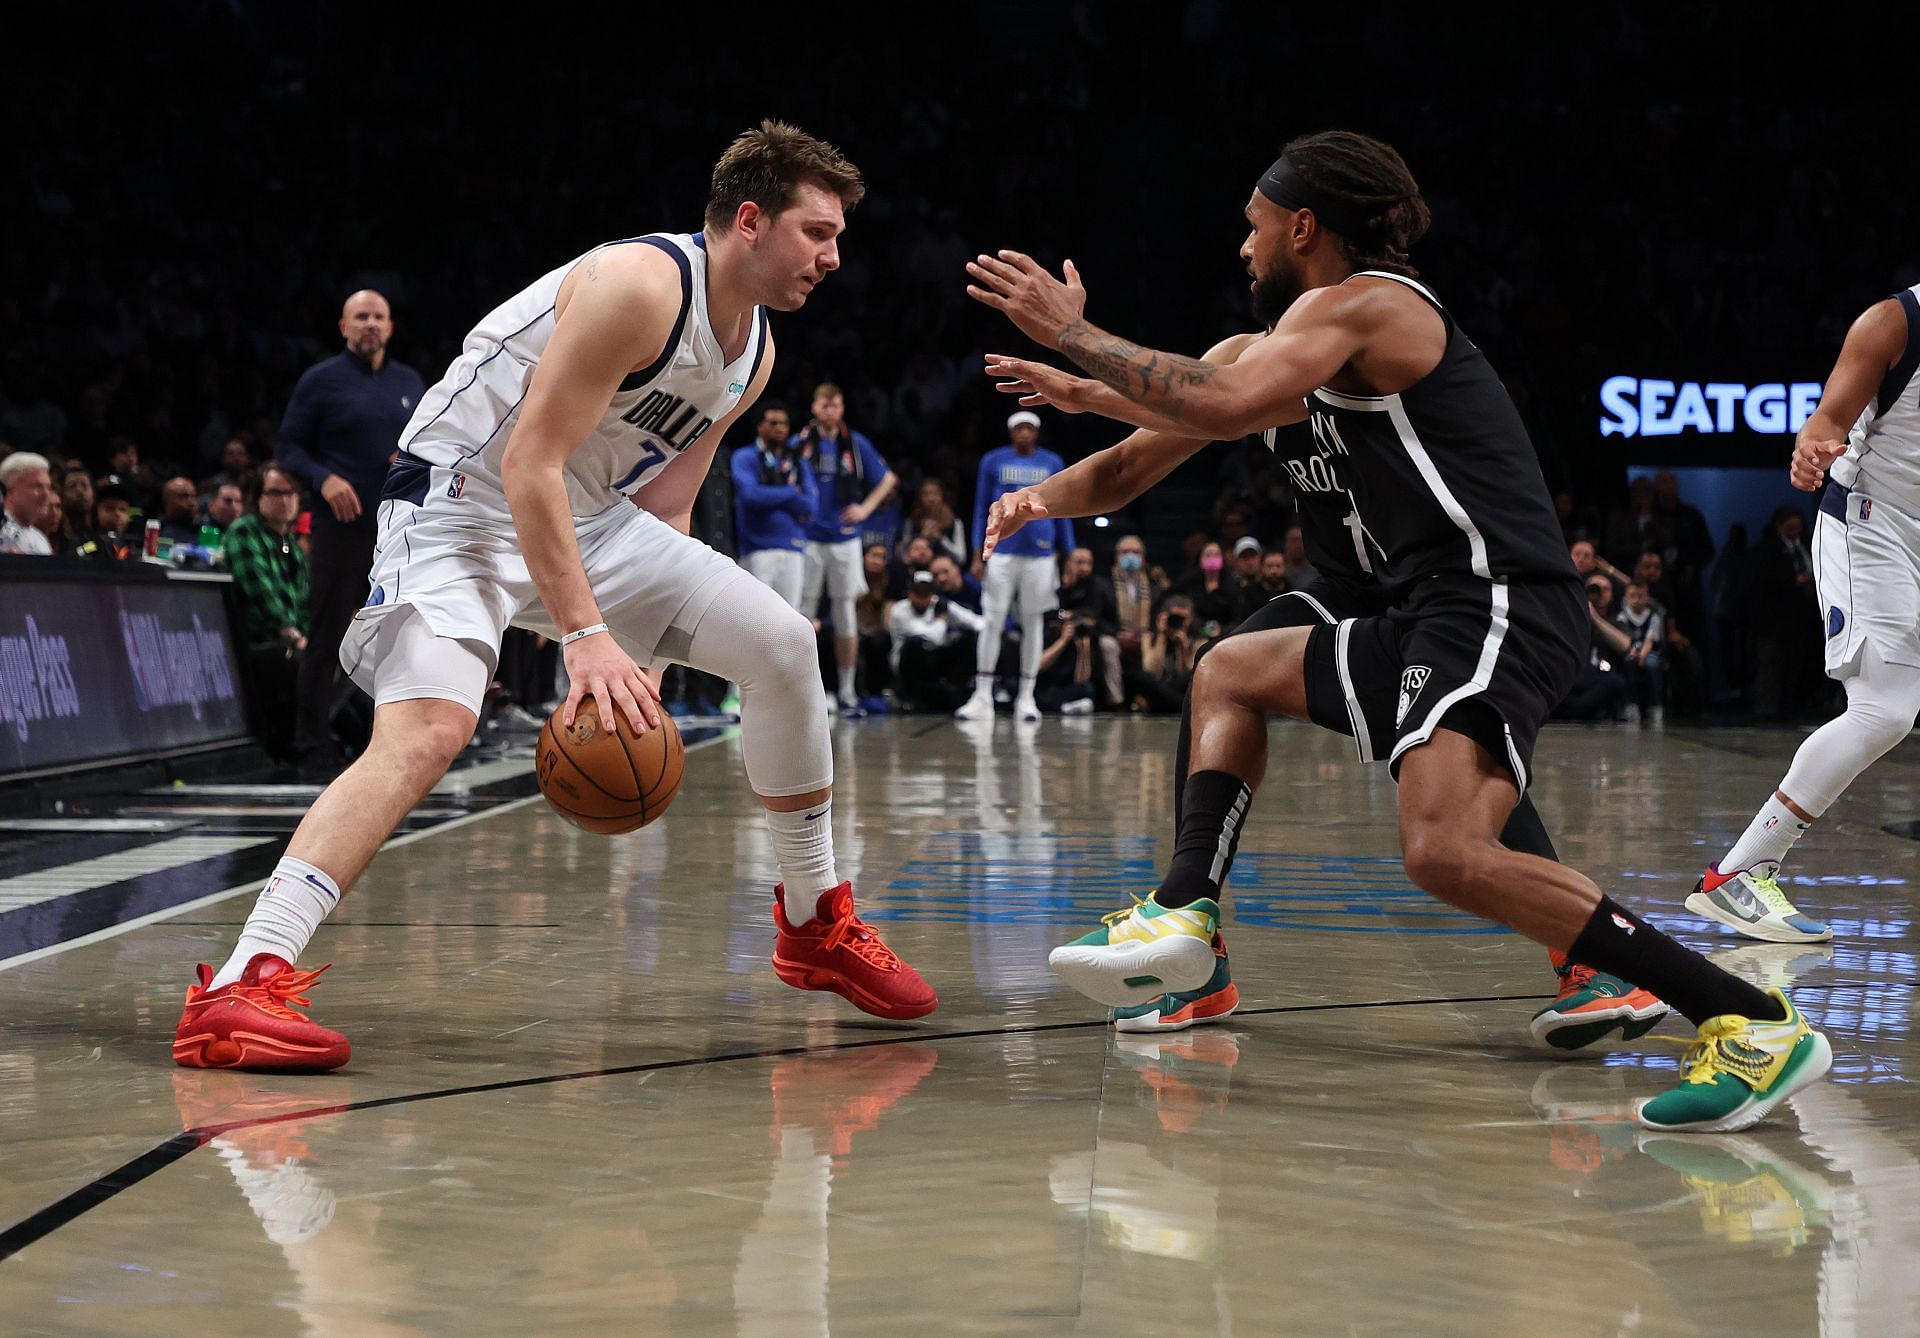 Luka Doncic sizes up Patty Mills on the perimeter.